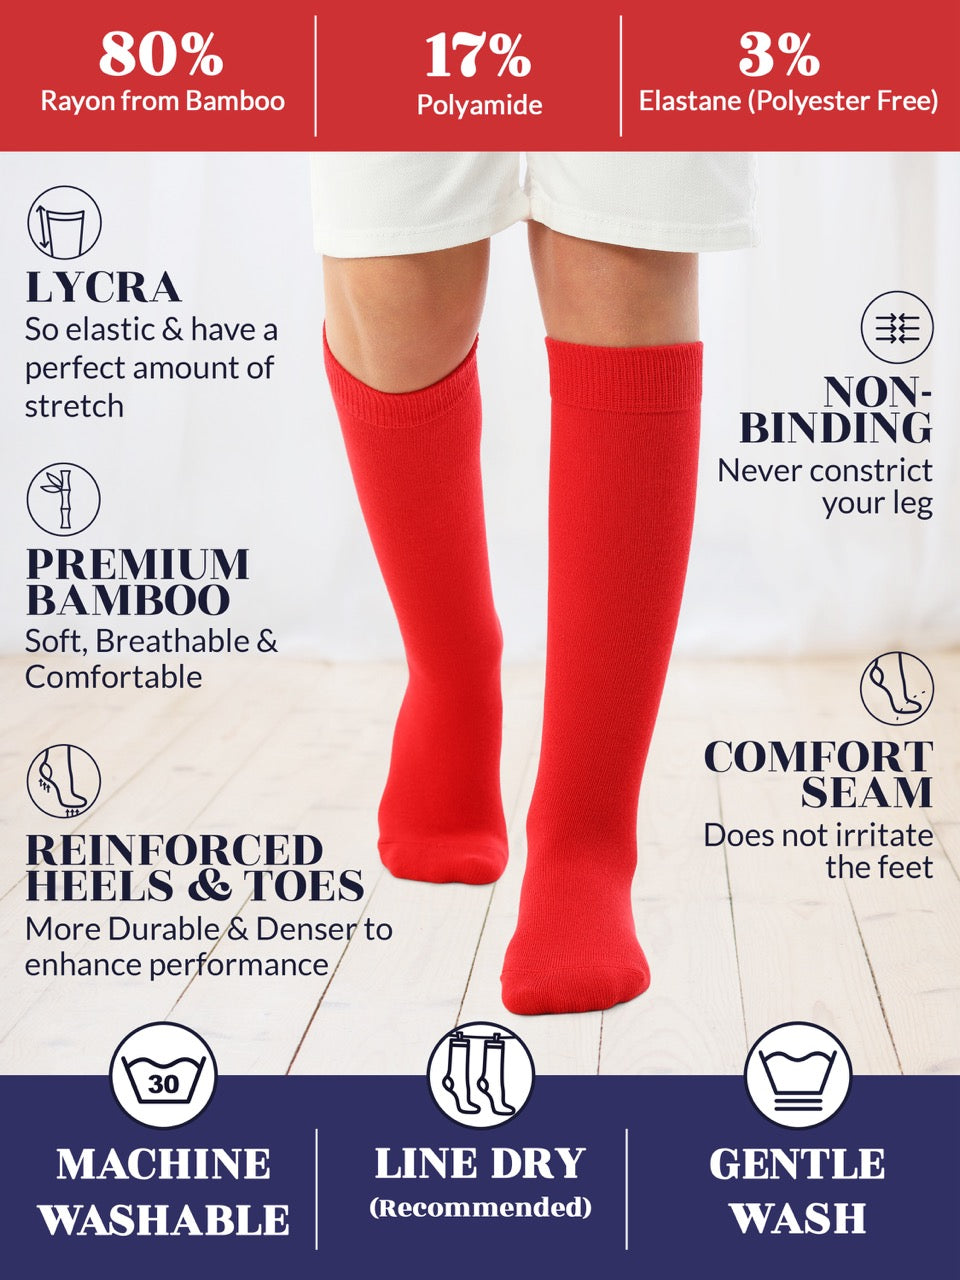 Experience the ultimate comfort and style with Hugh Ugoli Kids Bamboo School Socks. These red socks perfect for school or everyday wear, our high-quality knee-high socks meet uniform standards while reducing blisters and staying in place. Available in four sizes for children aged 3-14 years